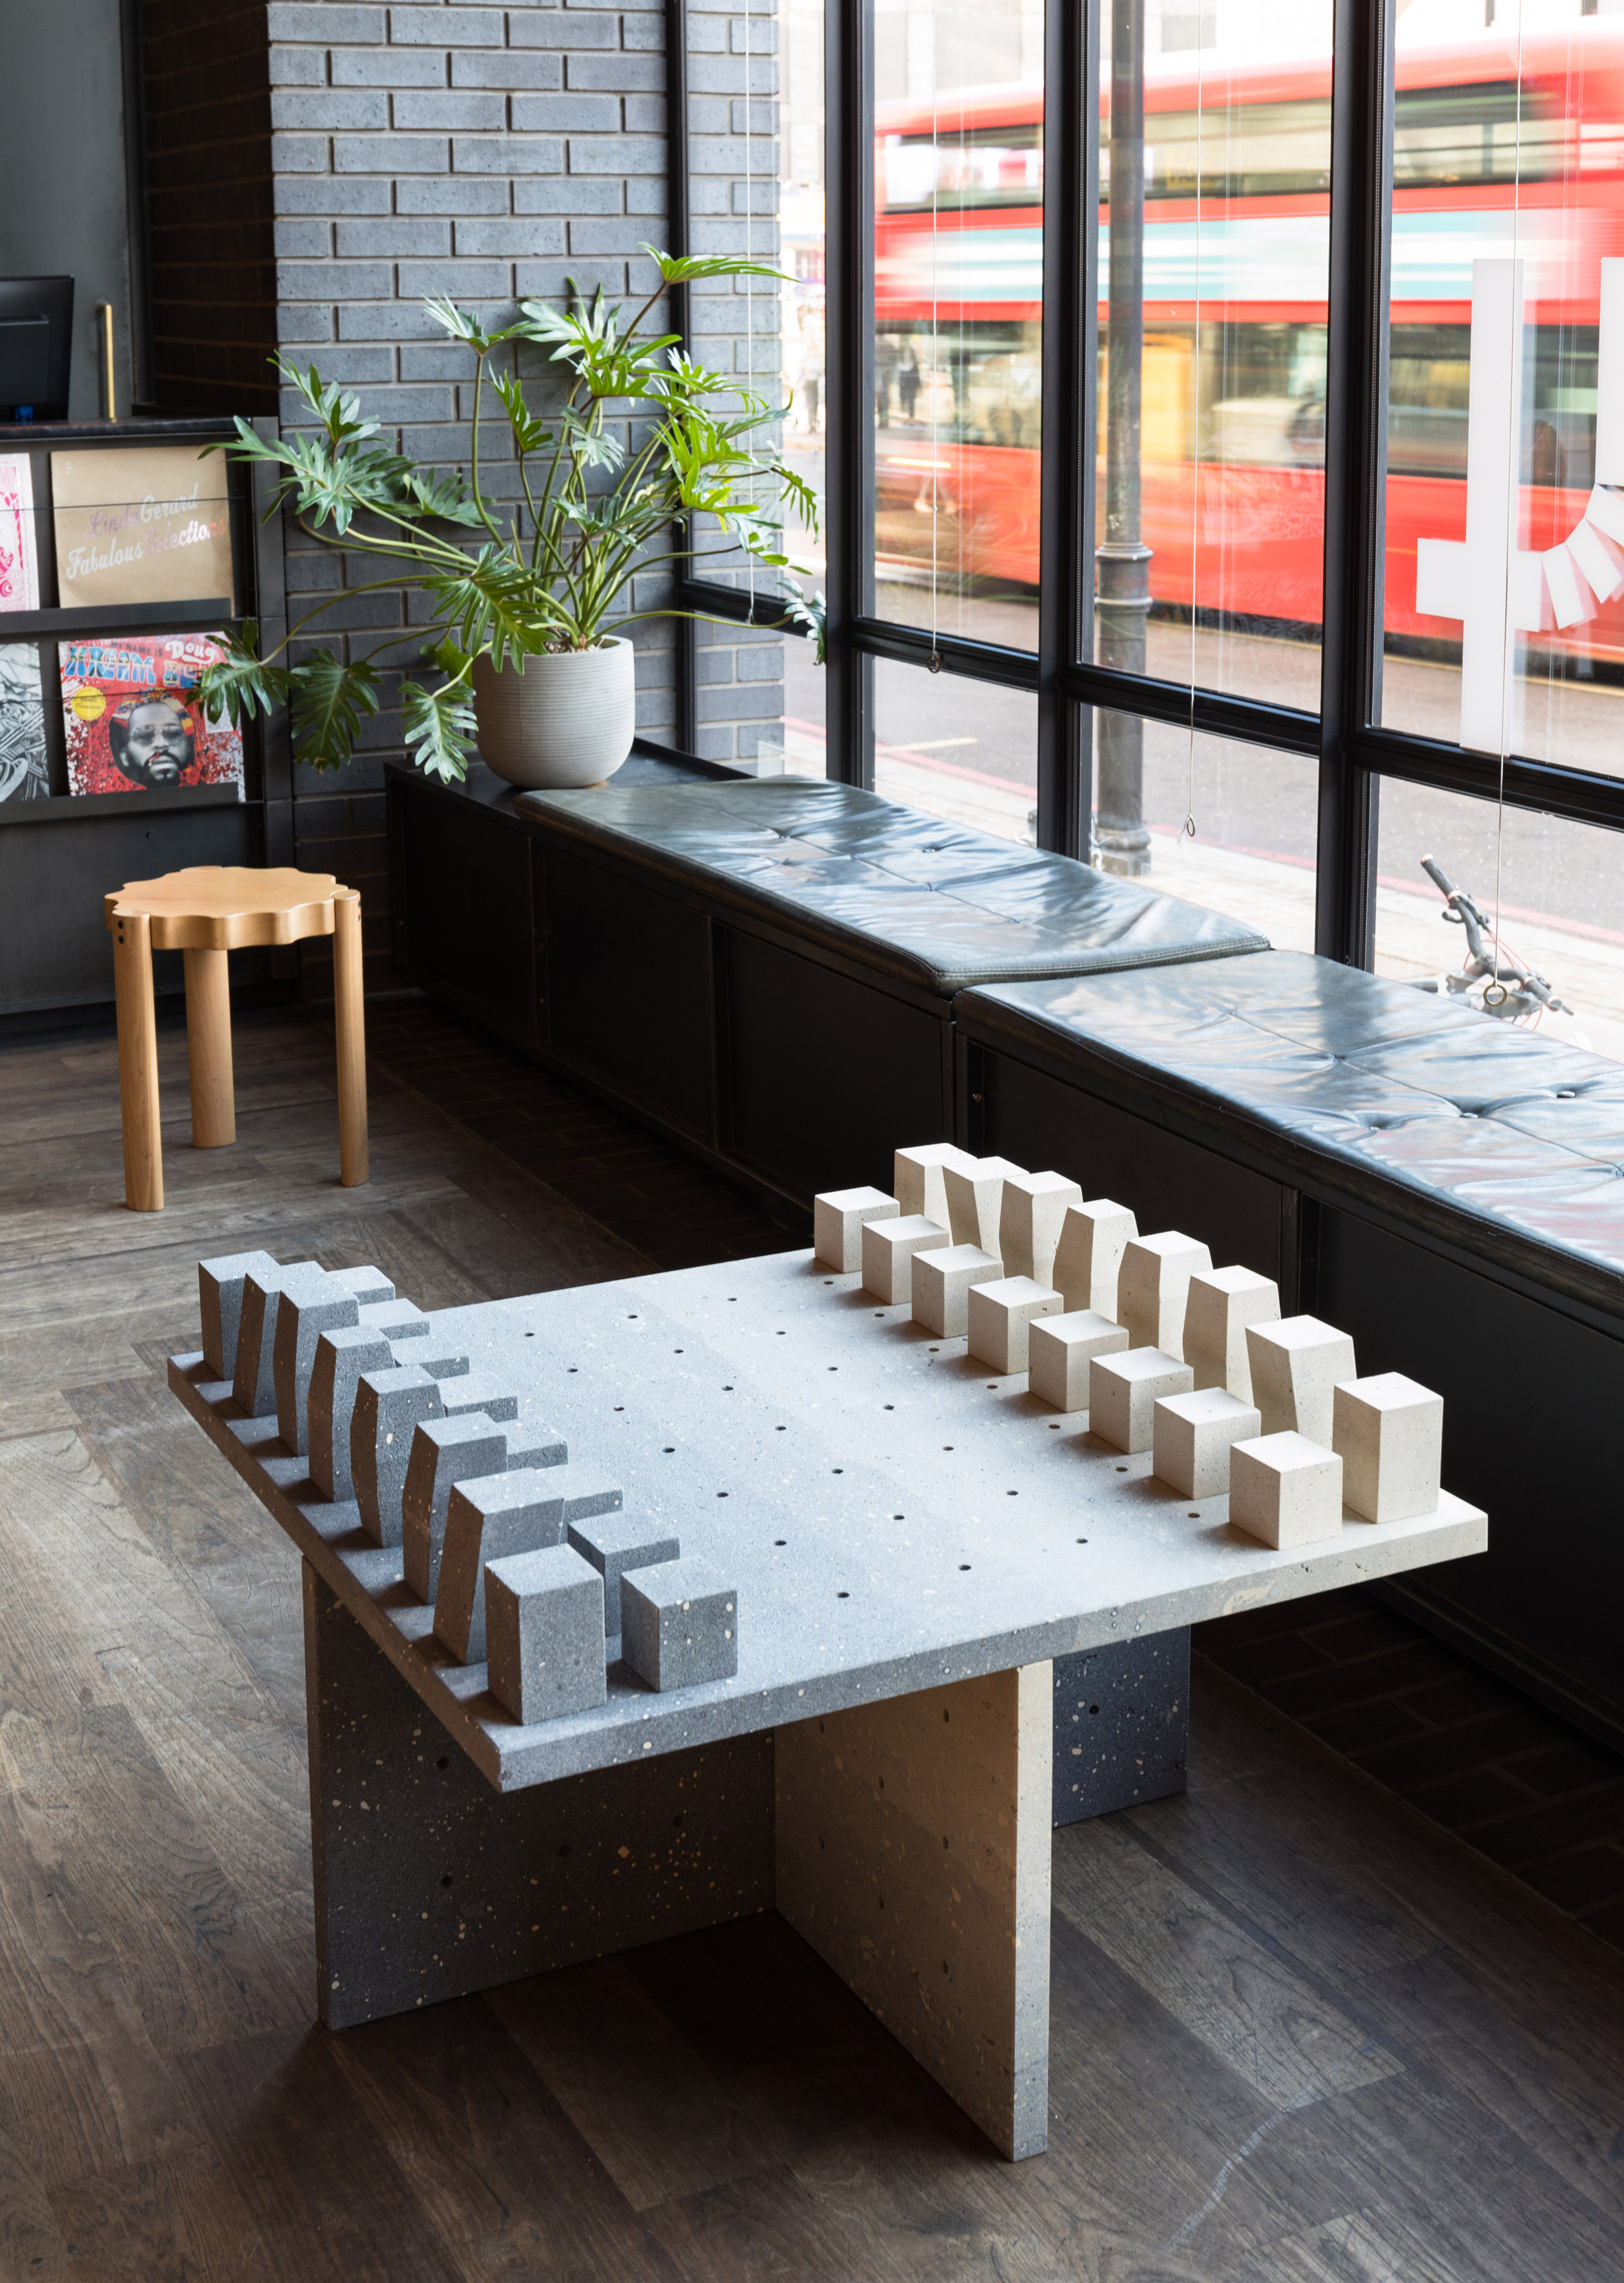 Abstract chess set and blue tableware created for London's Ace Hotel